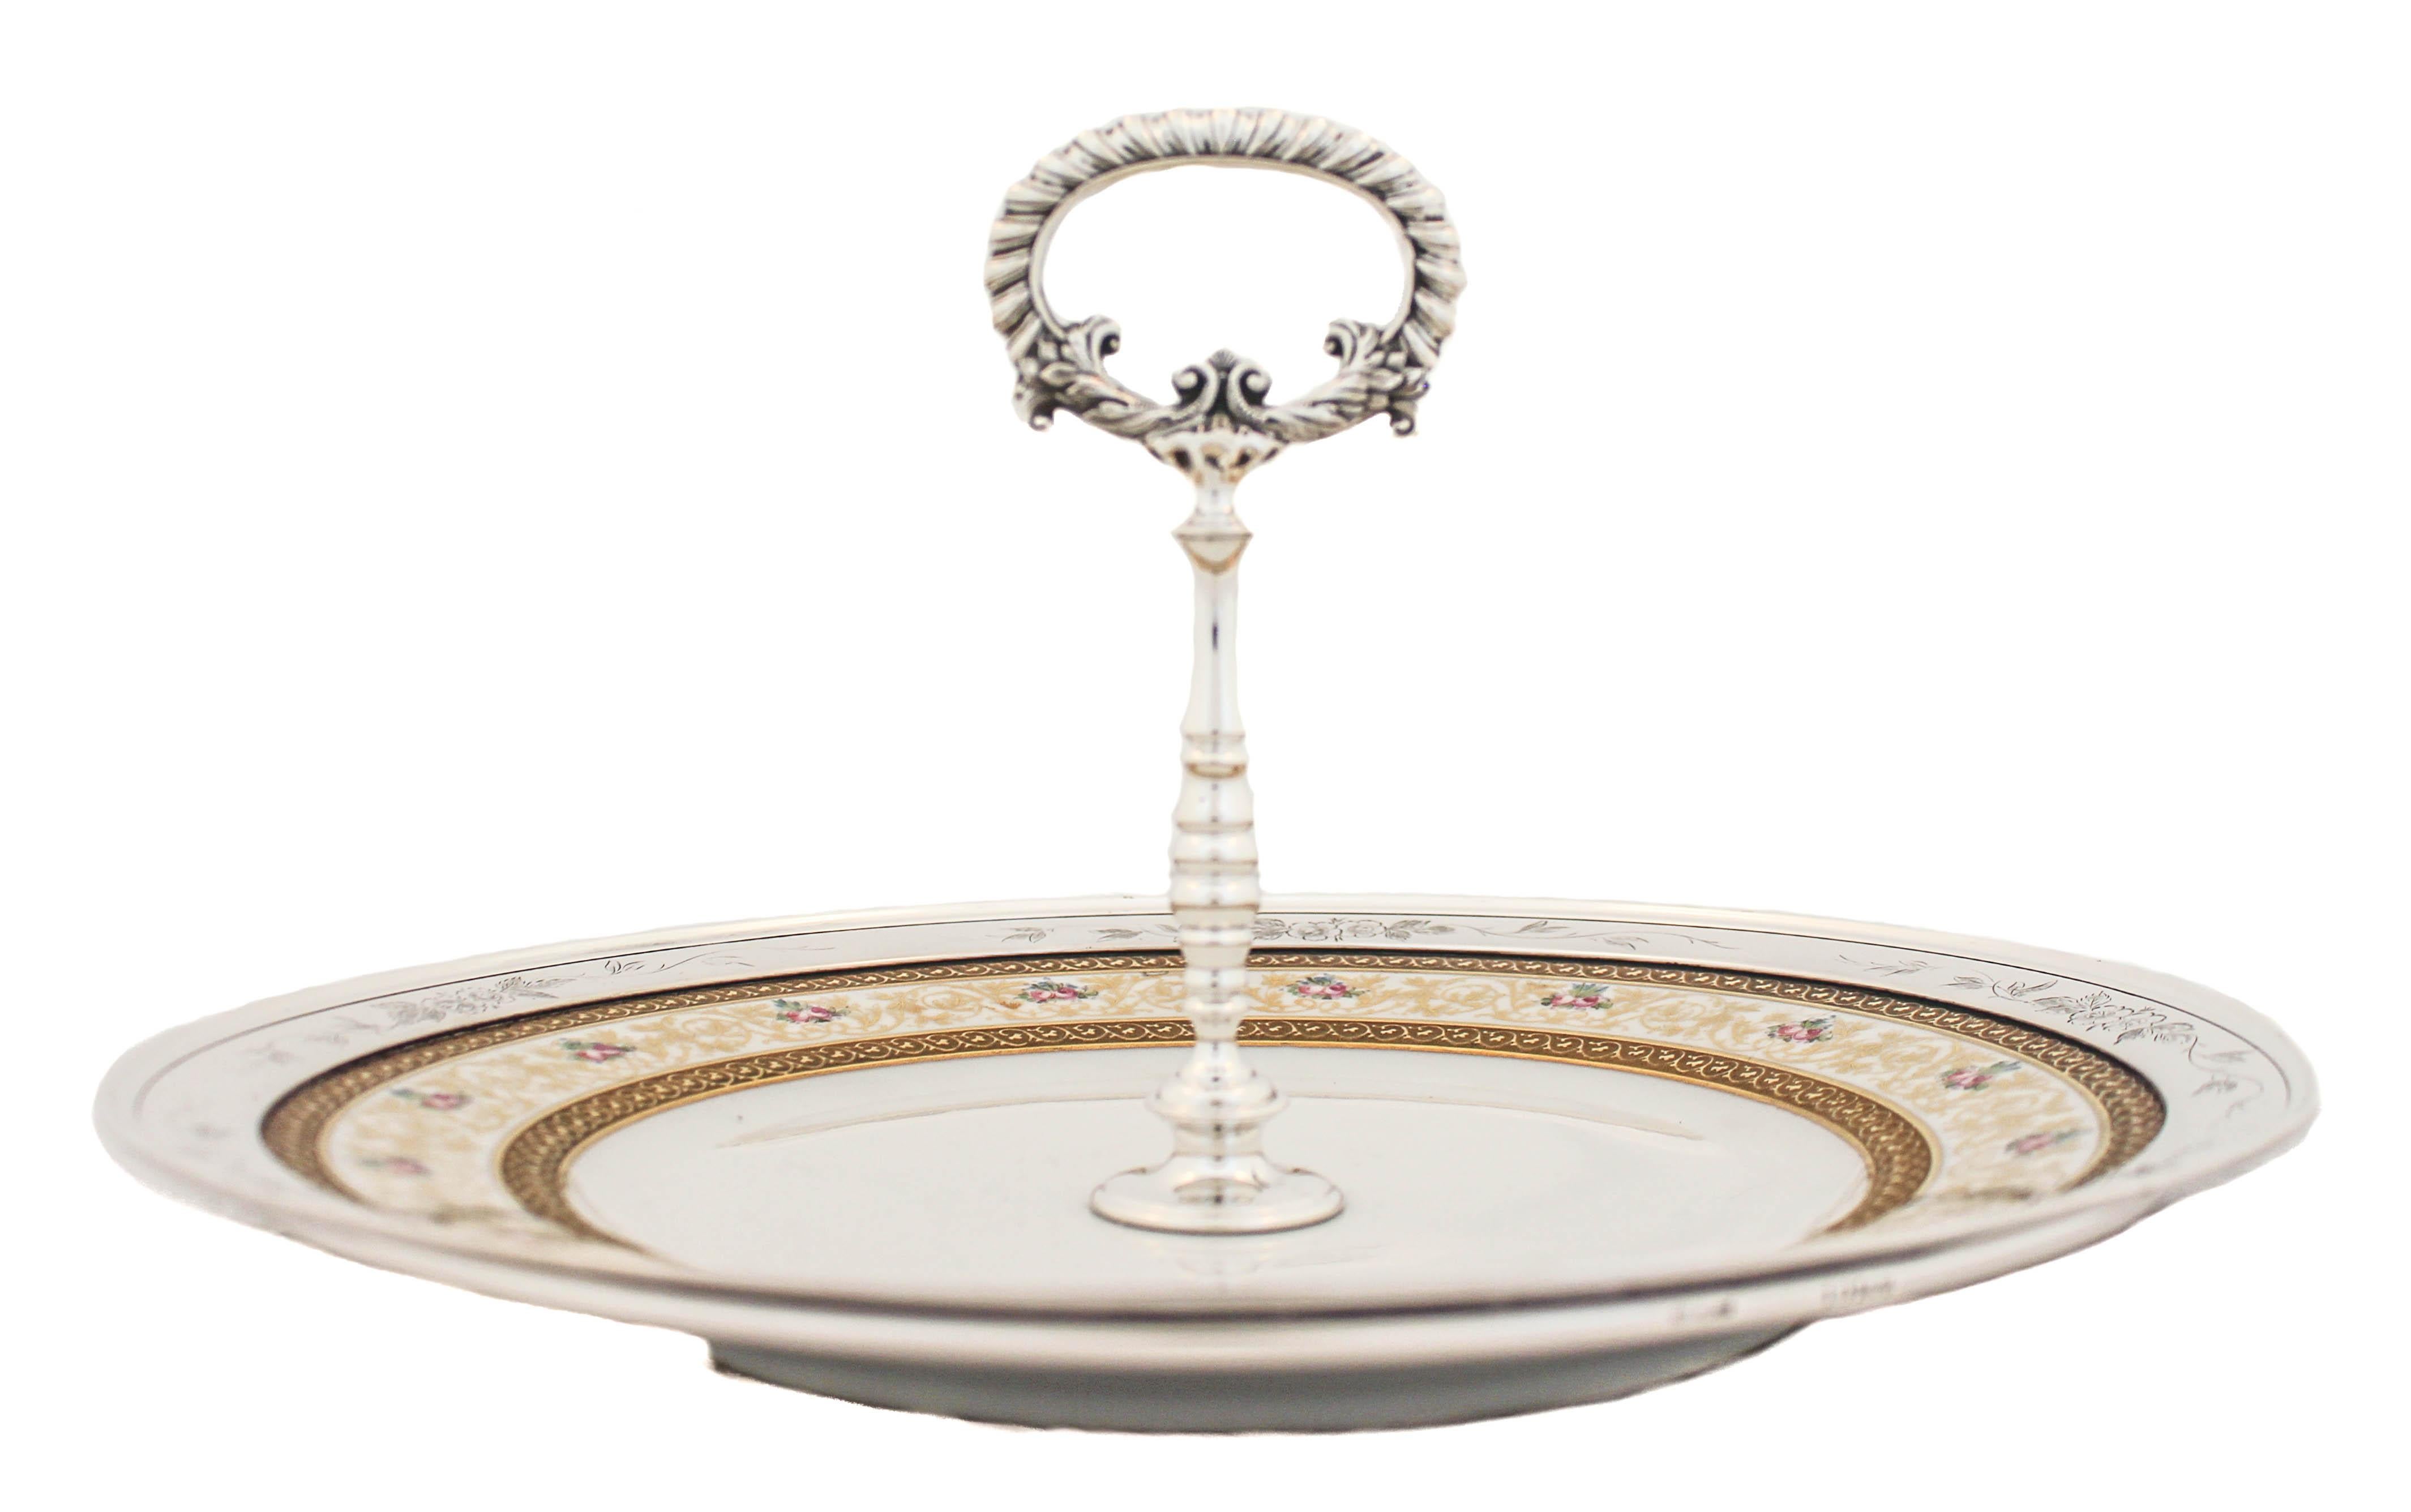 We are thrilled to offer you this sterling silver and porcelain dessert tray.  The edge and center handle are sterling silver while the inner tray is made of fine porcelain.  The silver rim has etched flowers and leaves and the handle has a gadroon